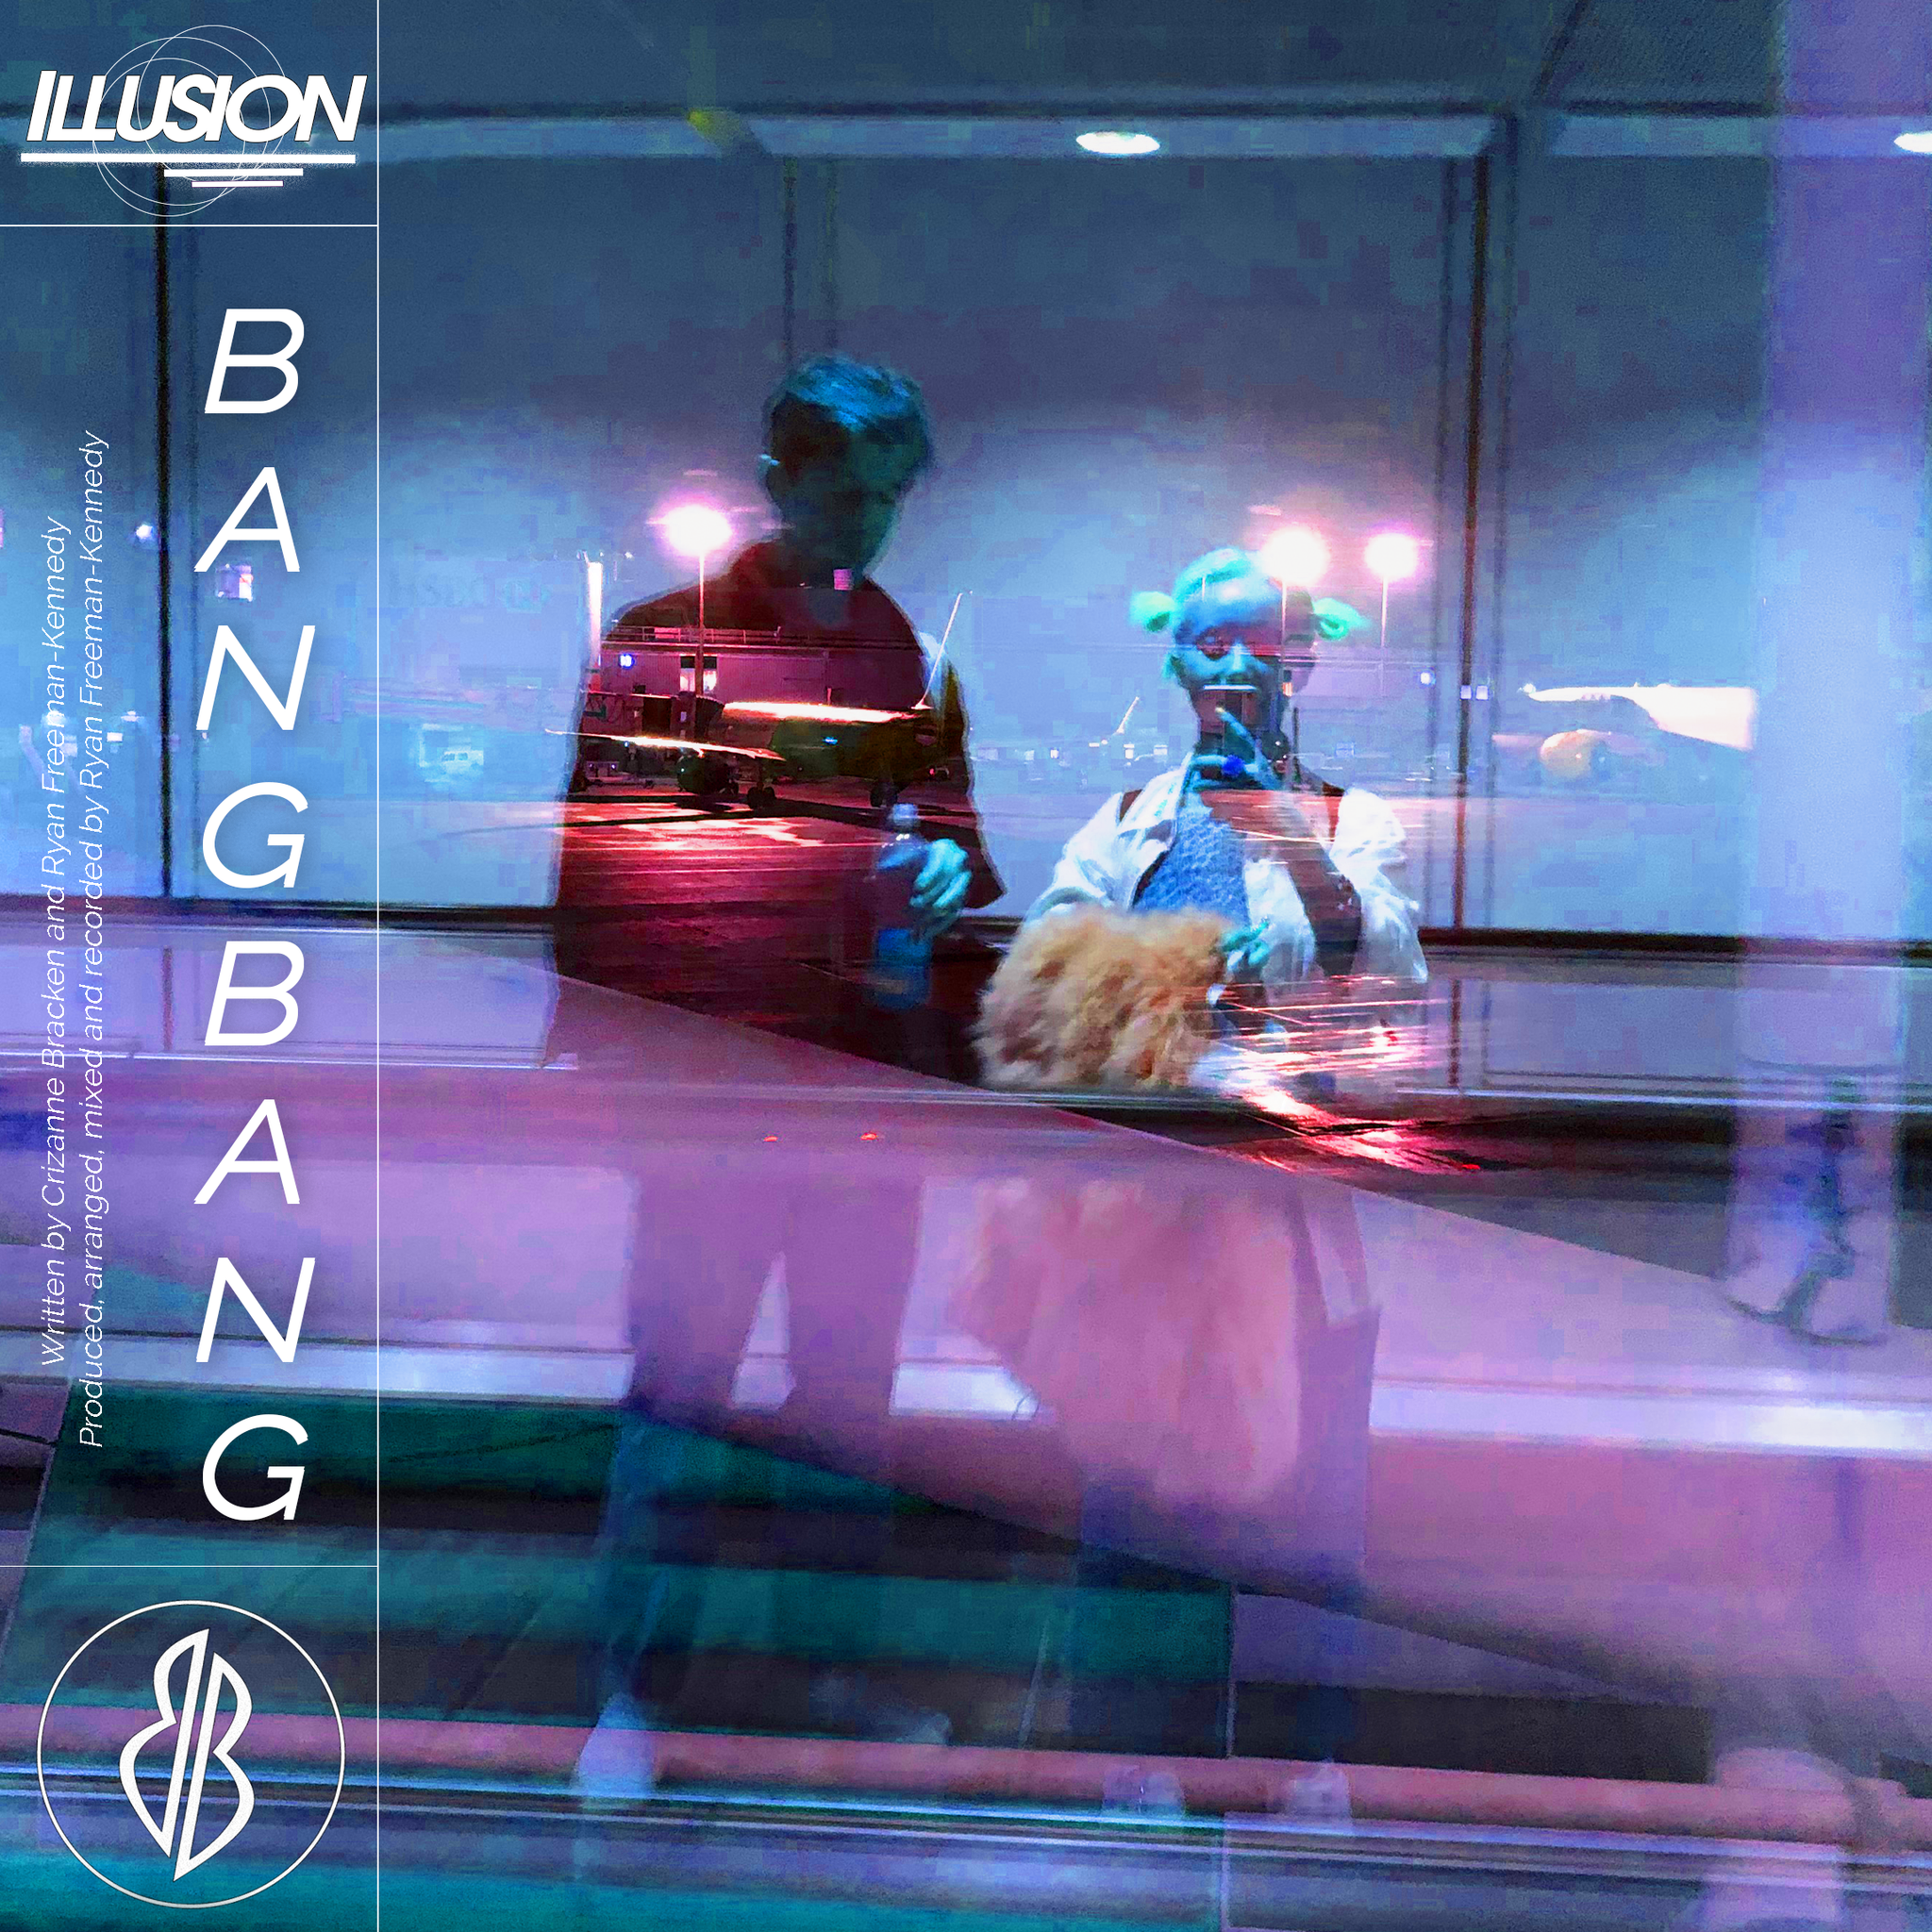 New Single "Illusion" from Bangbang! Check it out :)